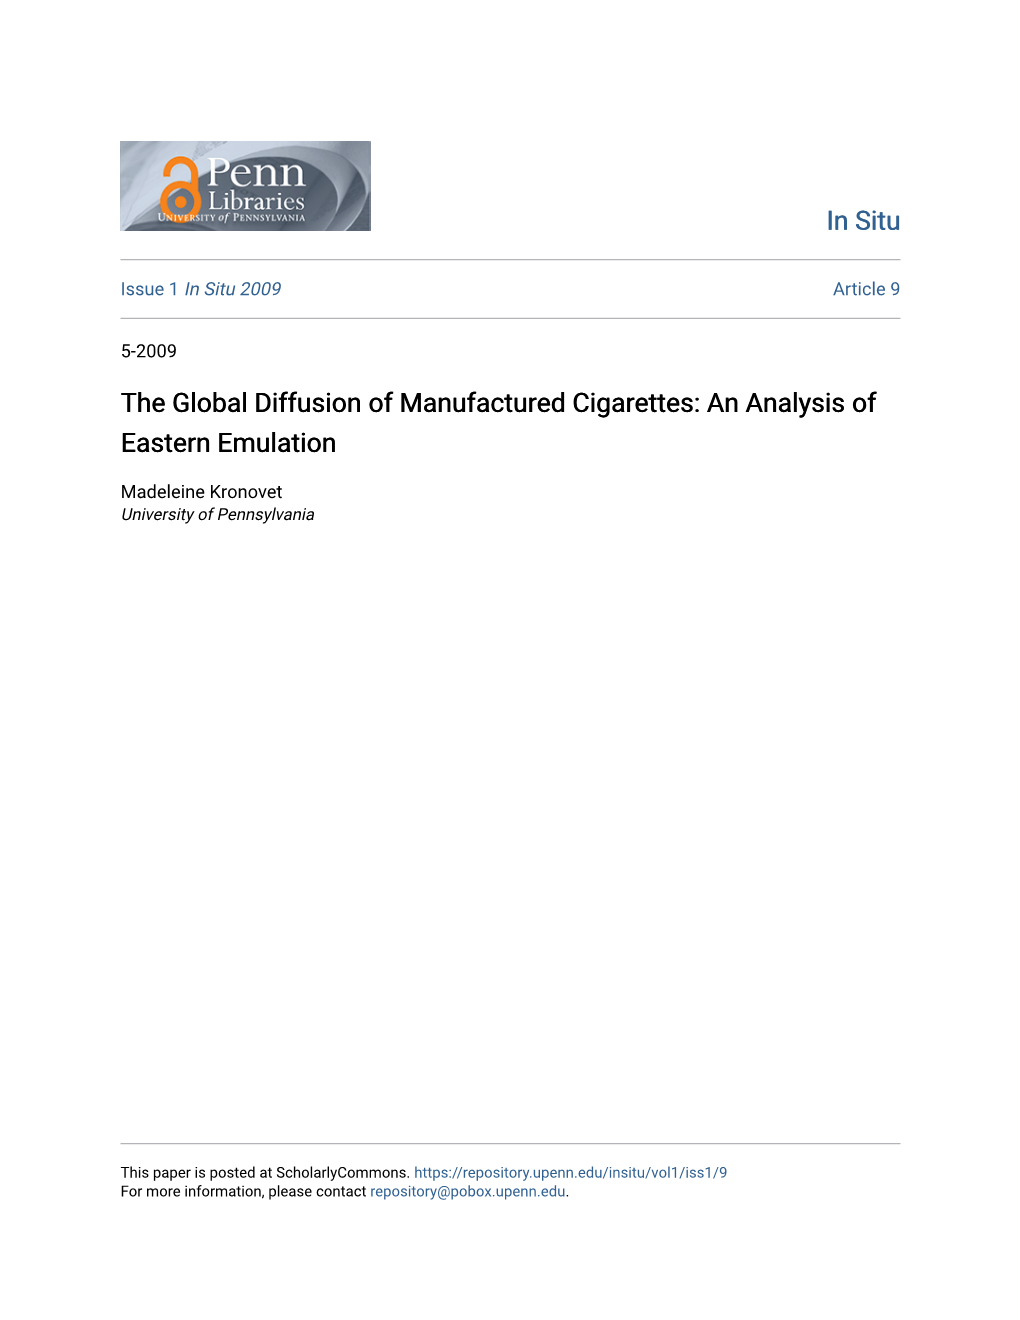 The Global Diffusion of Manufactured Cigarettes: an Analysis of Eastern Emulation